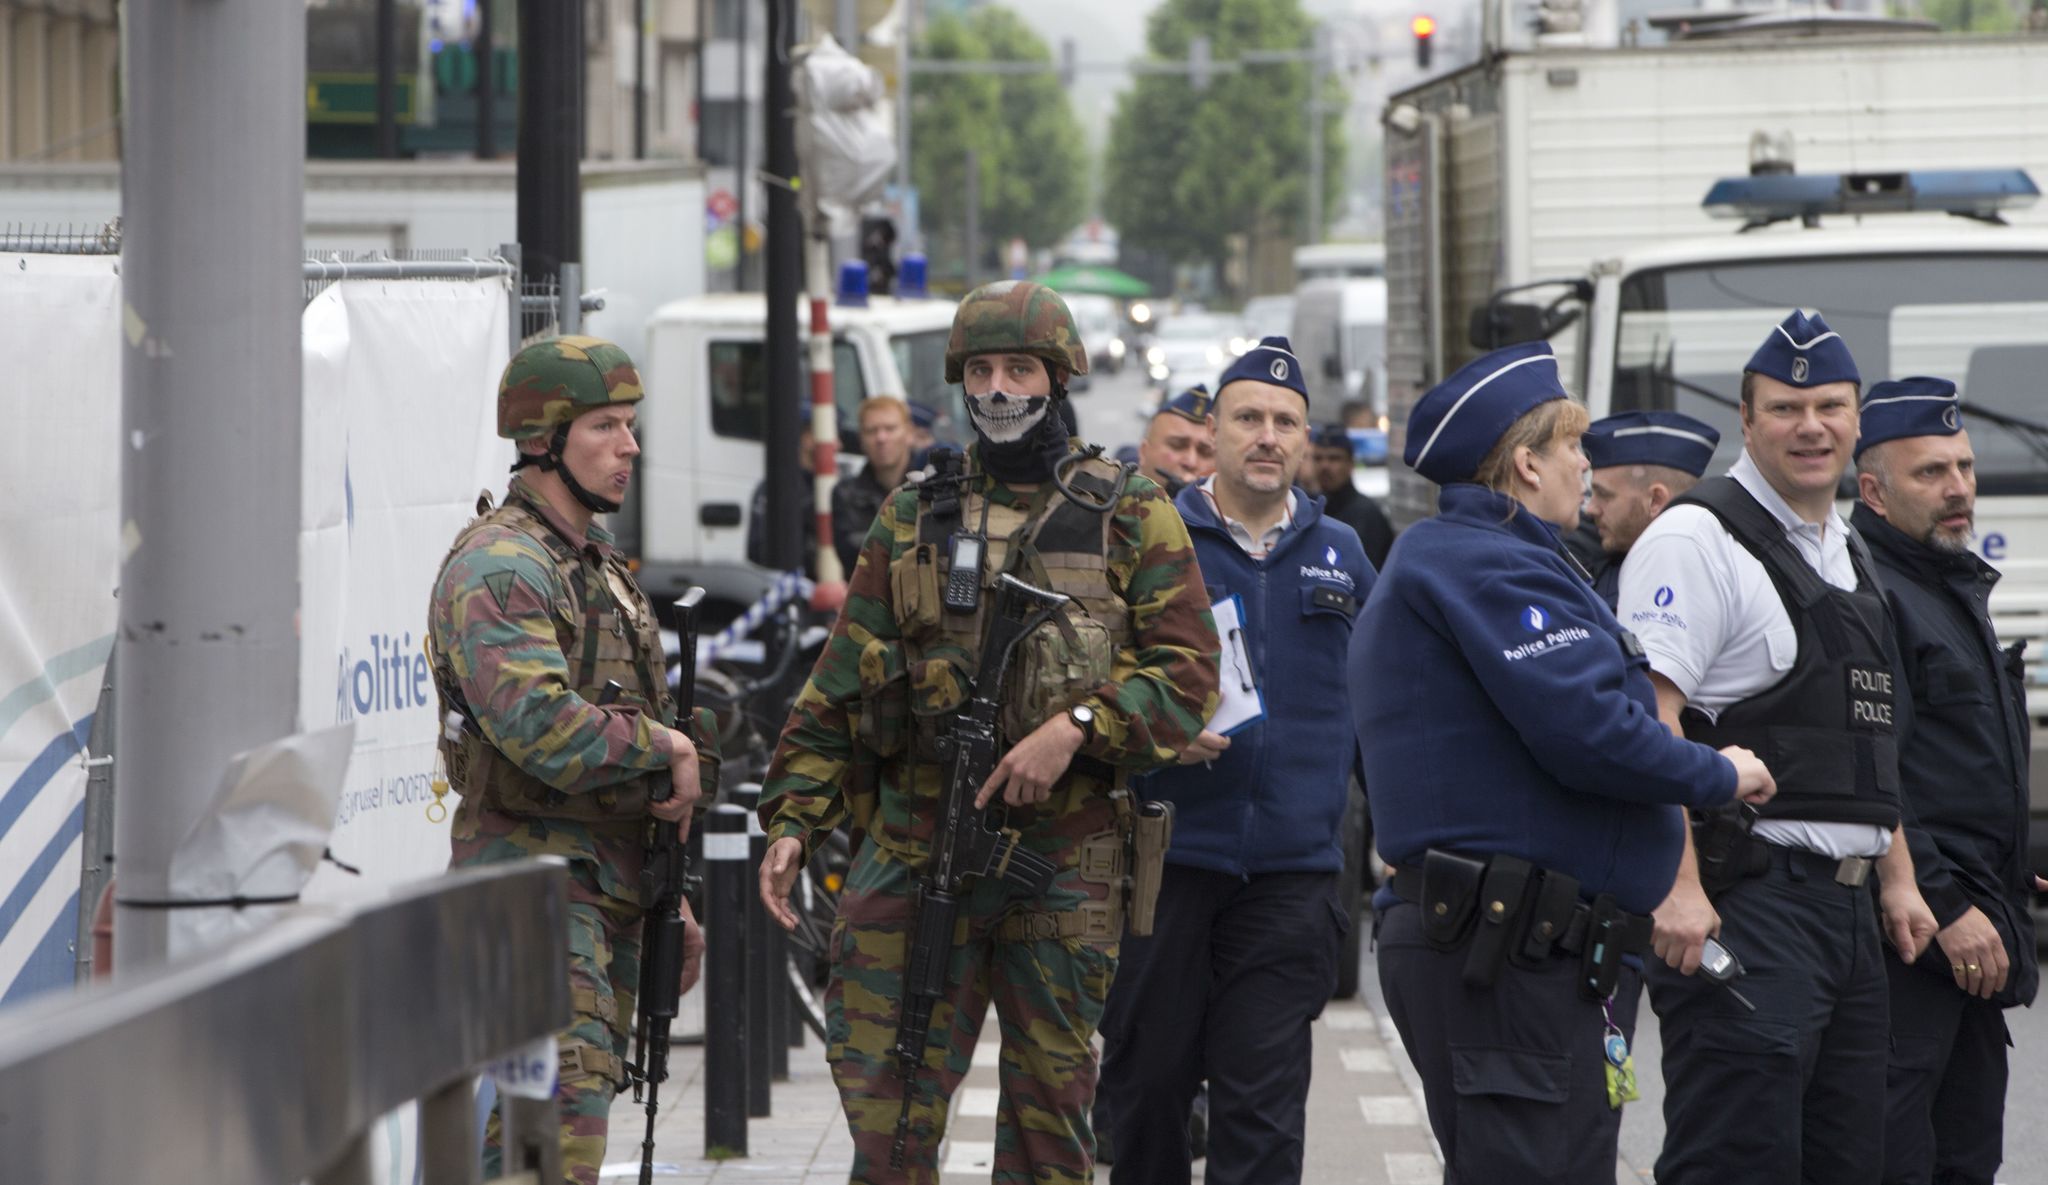 Belgian police and Belgian Army soldier stand guard at the scene of a bomb alert on a major shopping street in Brussels on Tuesday. Belgian authorities took a man into custody early Tuesday following a pre-dawn security alert at a major shopping center in downtown Brussels.